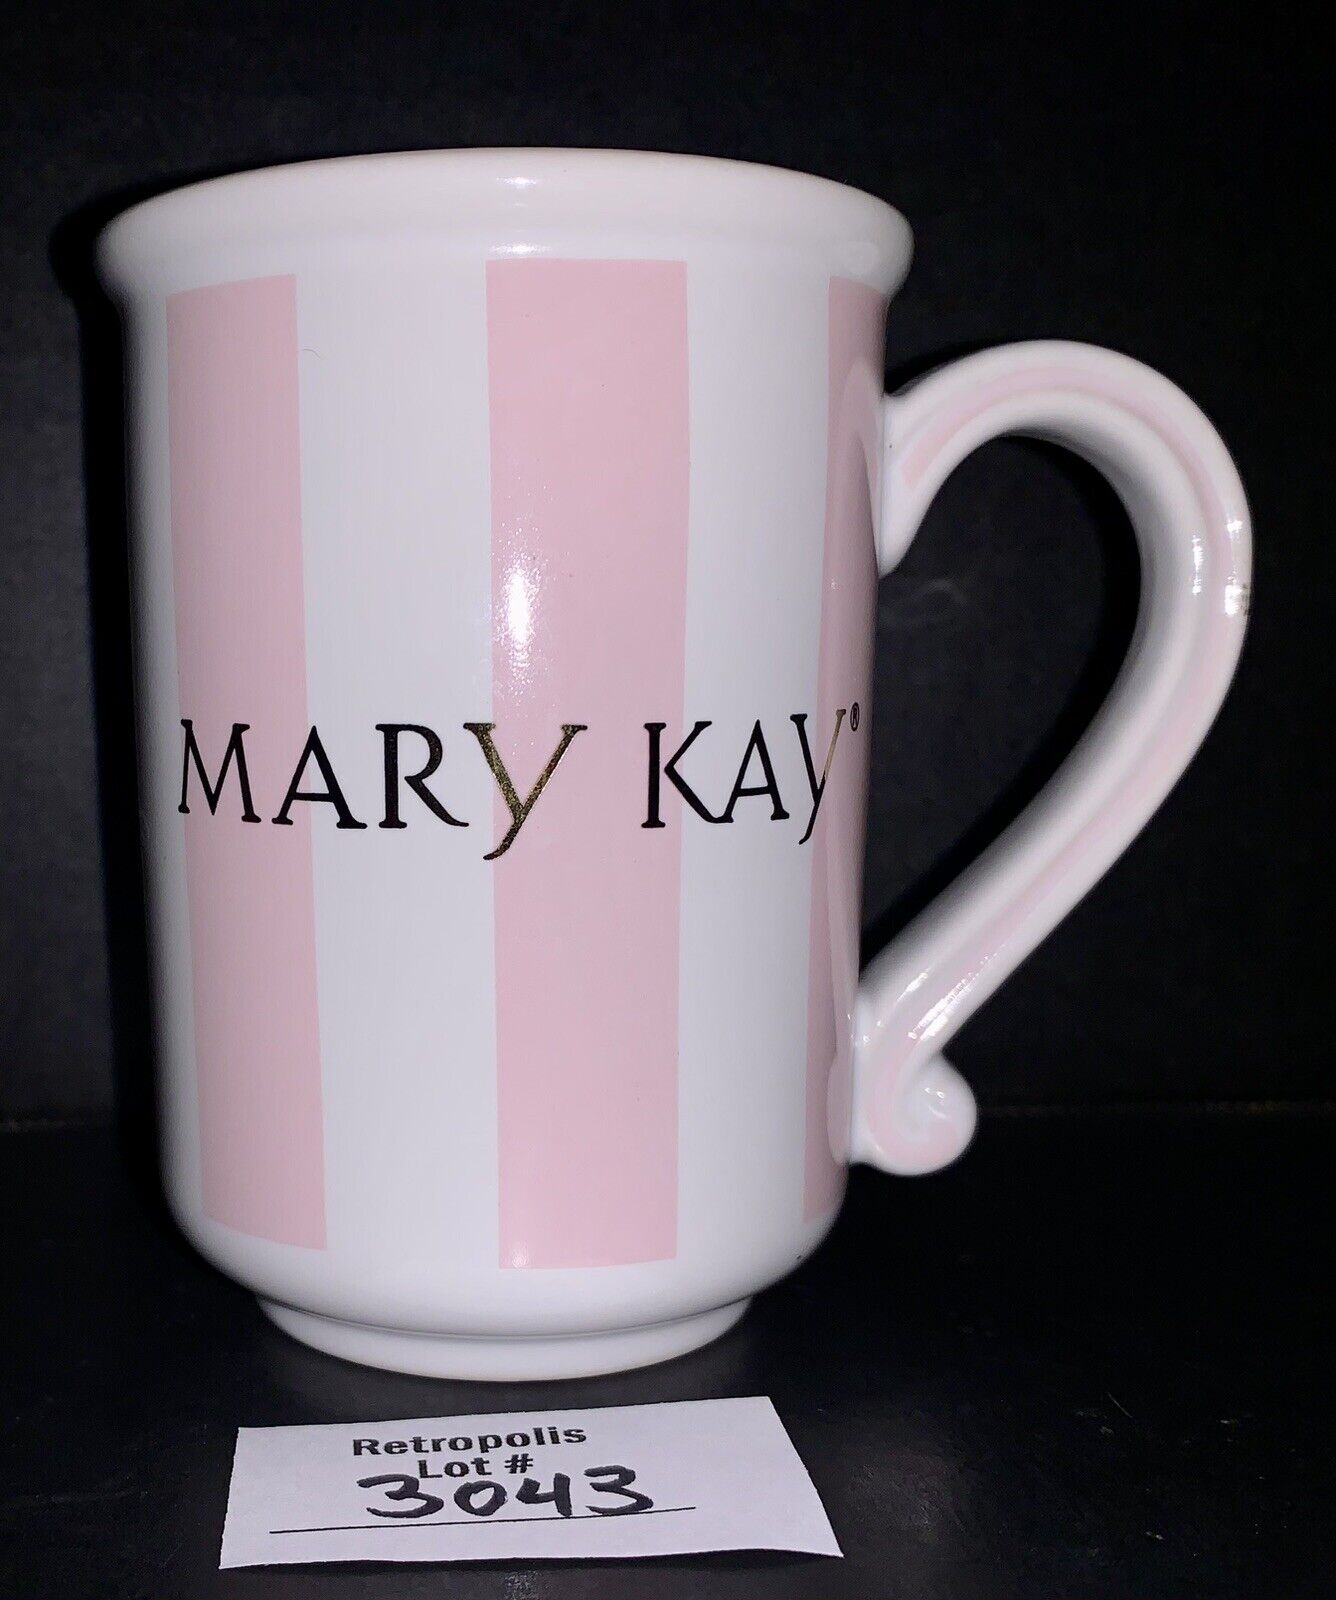 Vtg MARY KAY Pink and White Striped Ceramic Coffee Cocoa Mug Cup Collectible